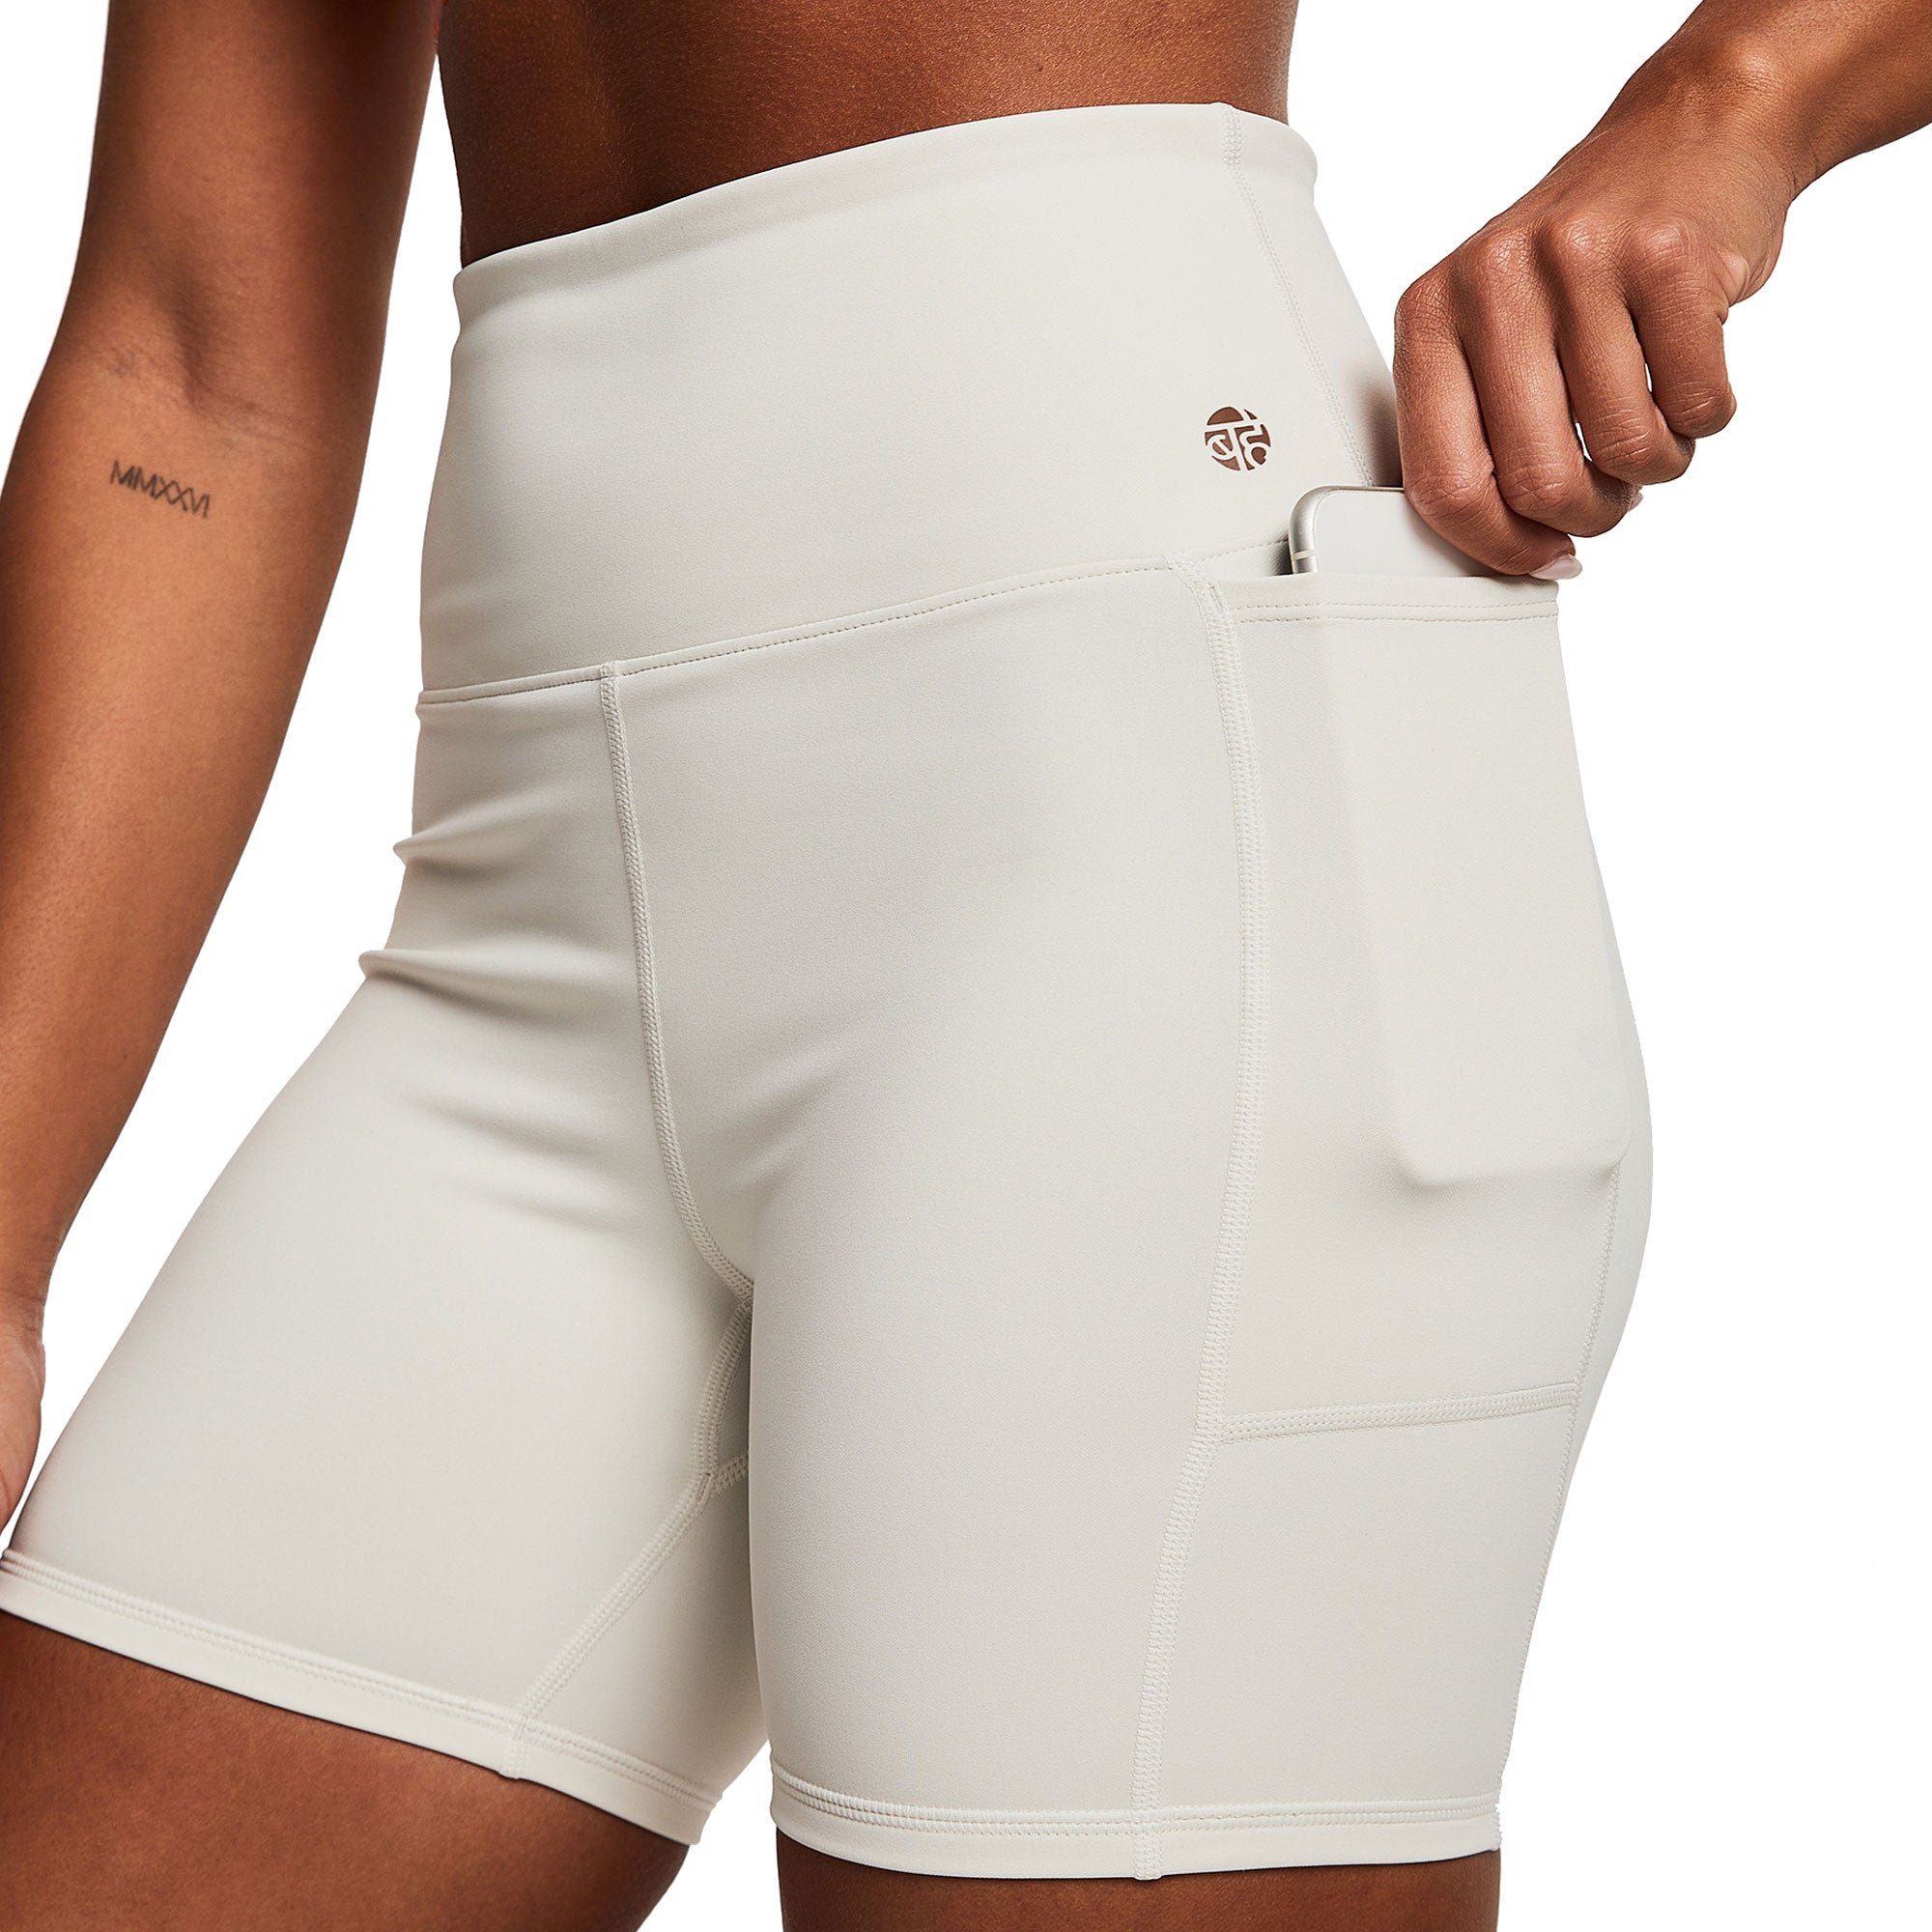 DINAMICA HIGH-RISE SHORTS 5" COCONUT